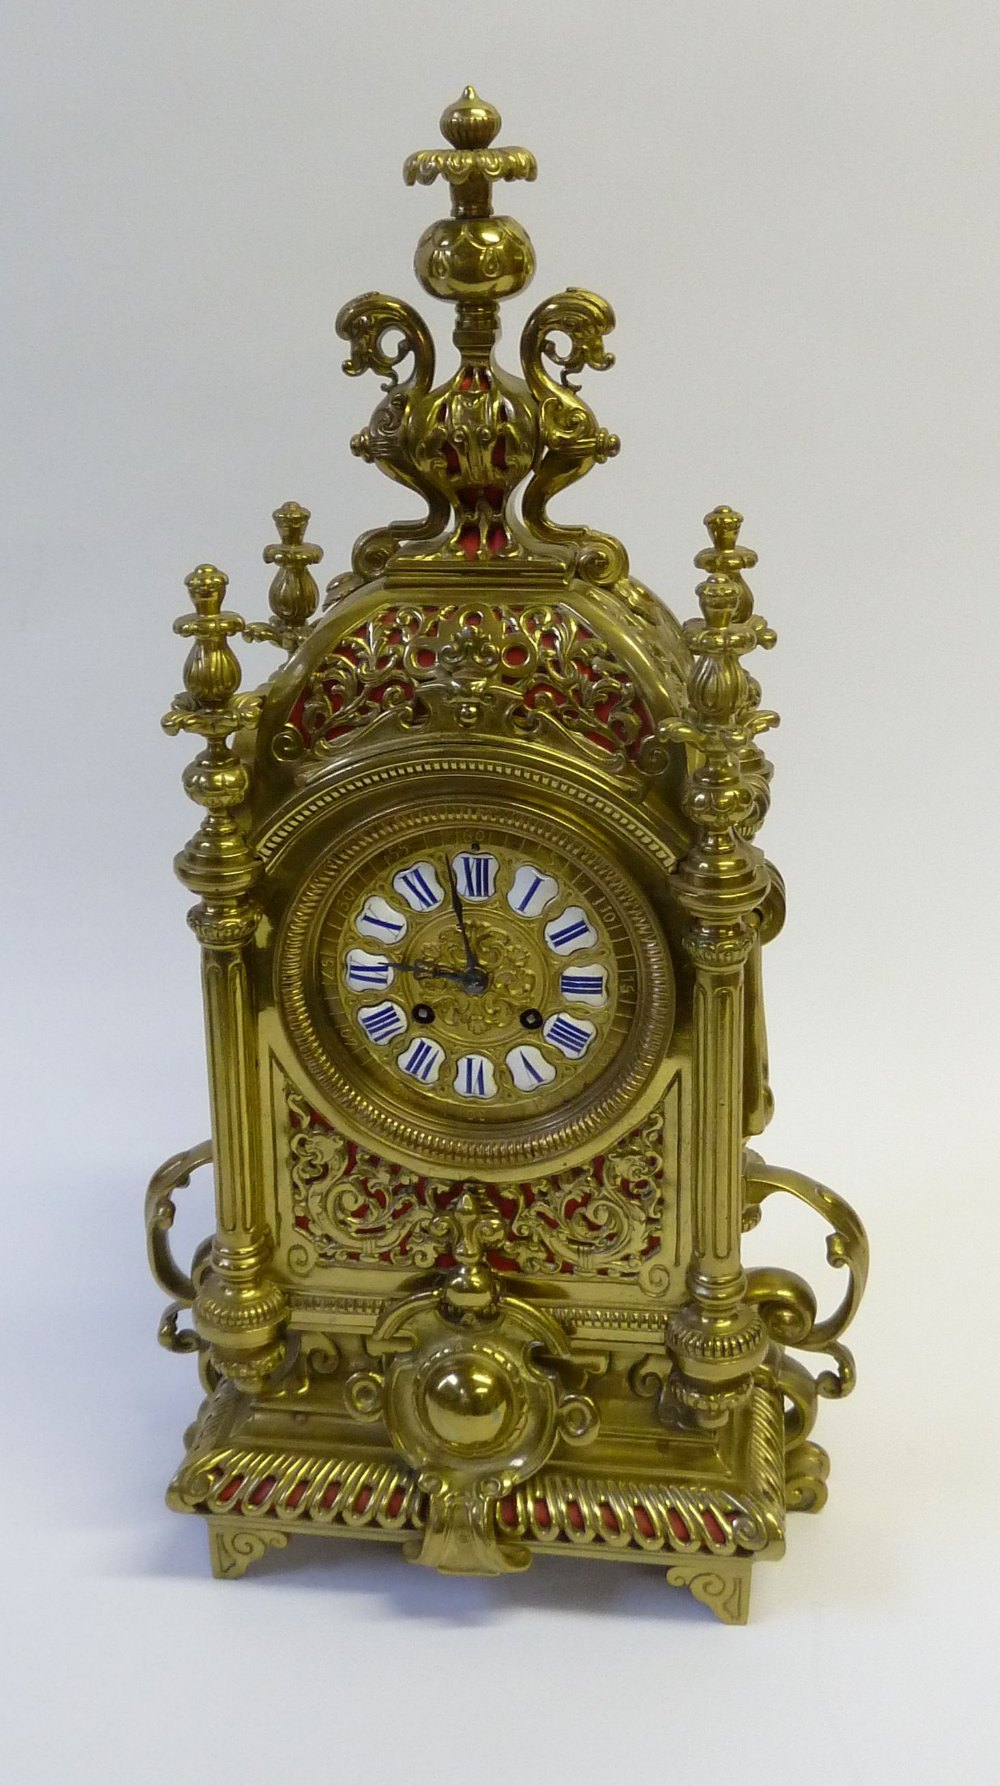 A LATE 19TH/EARLY 20TH CENTURY FRENCH GILT BRASS ORNATE MANTLE CLOCK, WITH JAPY FRÈRES SPRING DRIVEN